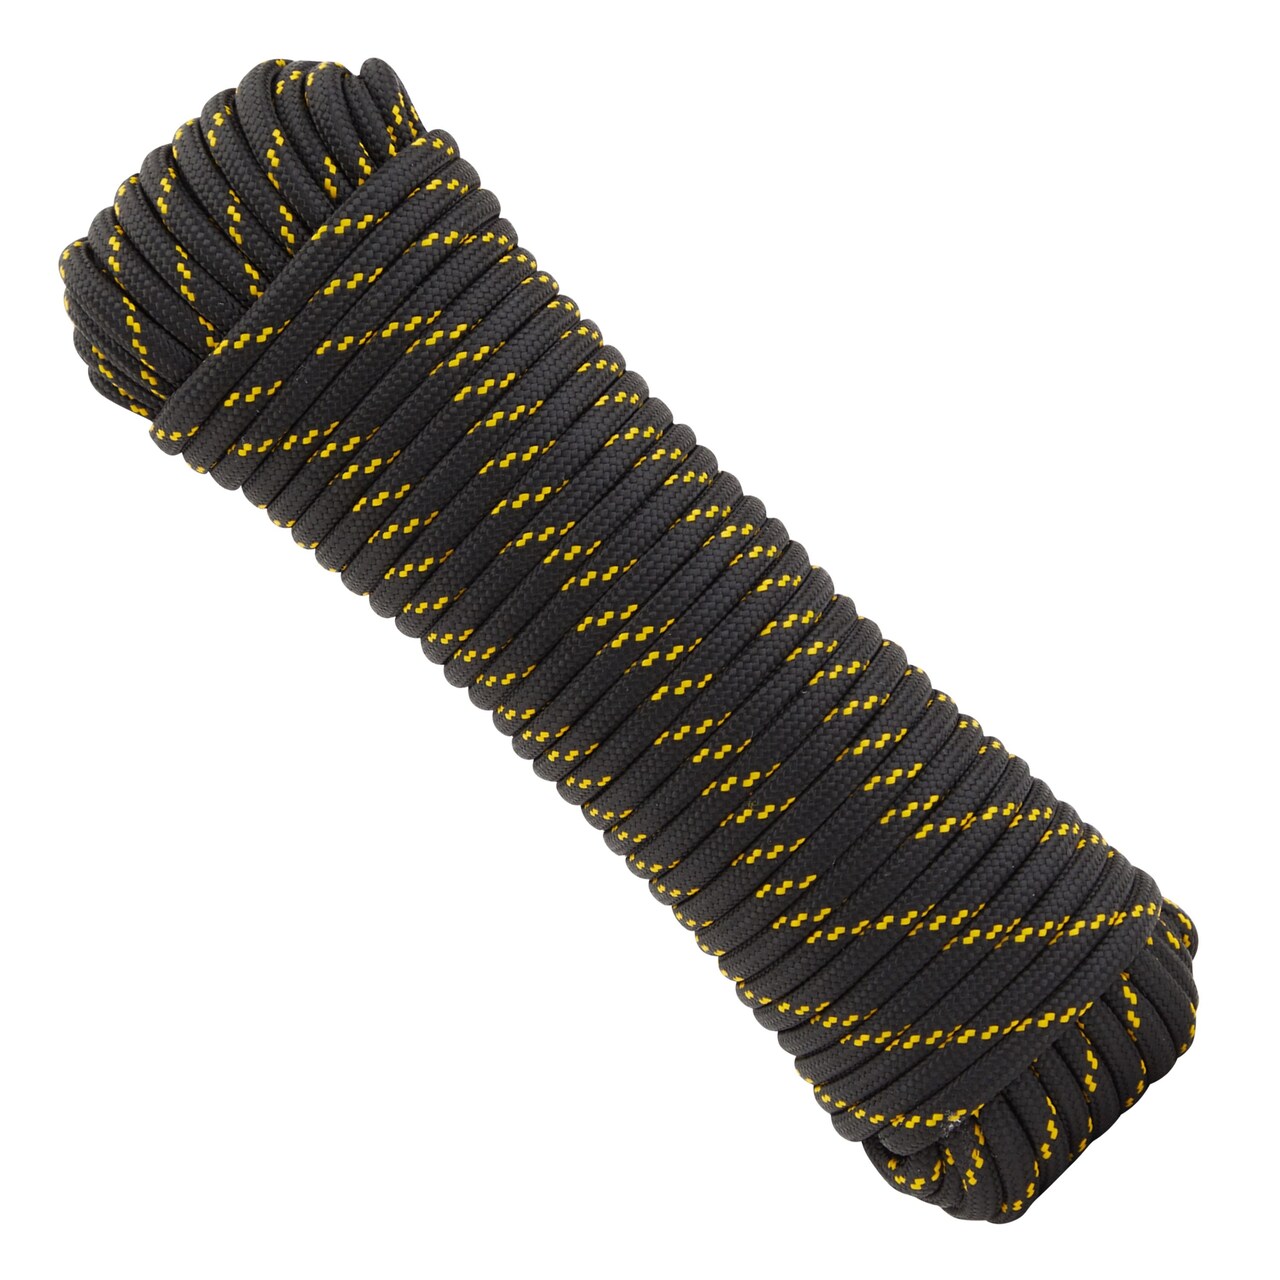 3/8 Inch x 100 Ft Braided Polyester Rope for Knot Tying Practice, Camping,  Boats, Trailer Tie Down, Pinata